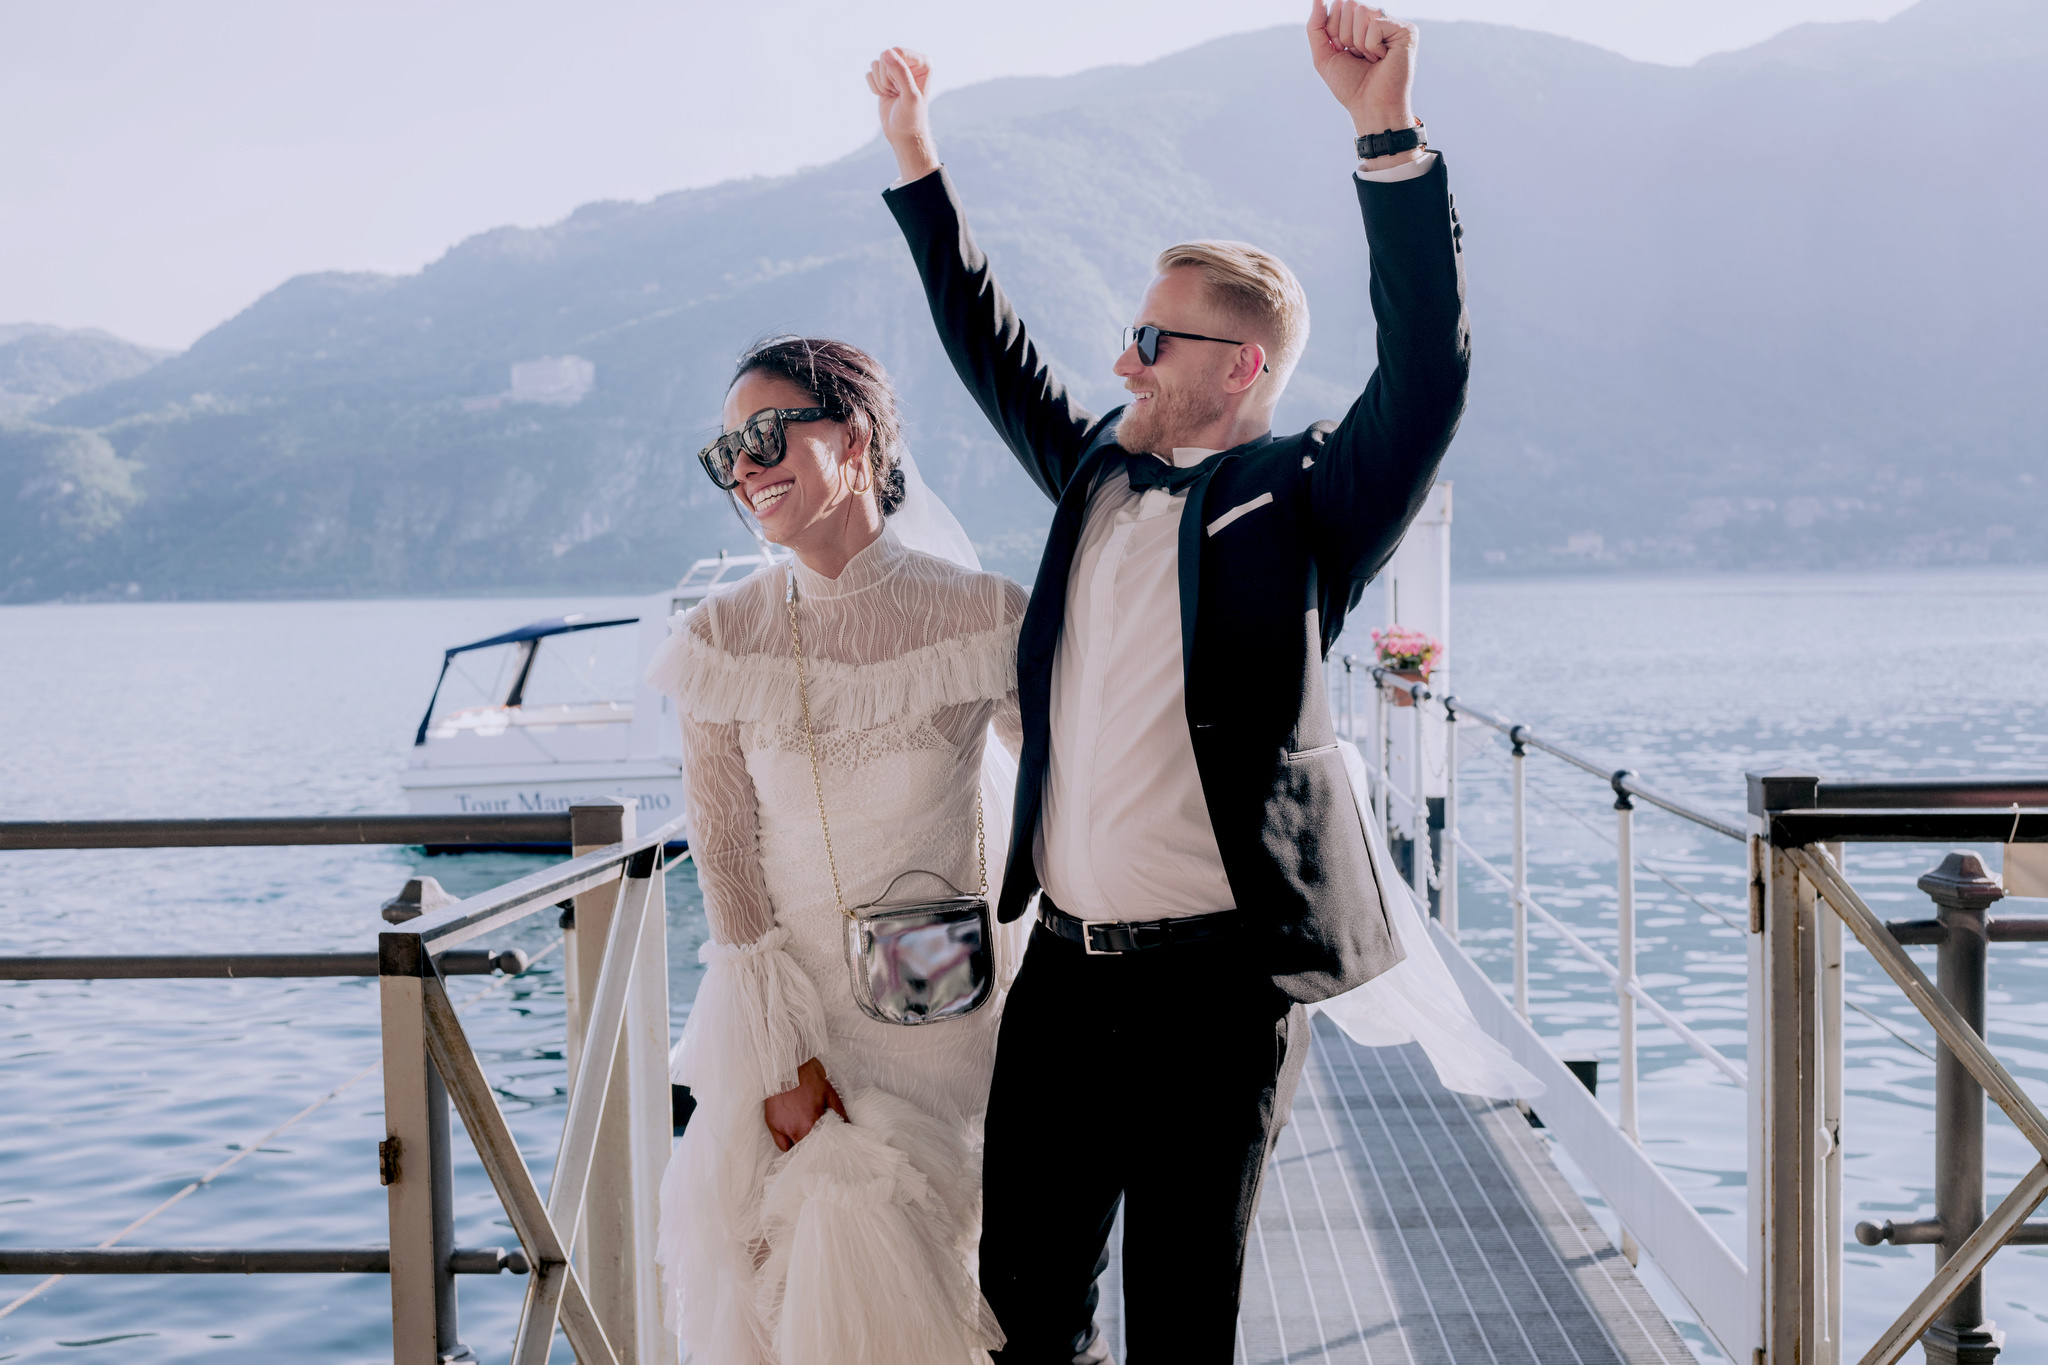 Editorial image of the bride and groom with Italian lake in the background. Destination Image by Jenny Fu Studio